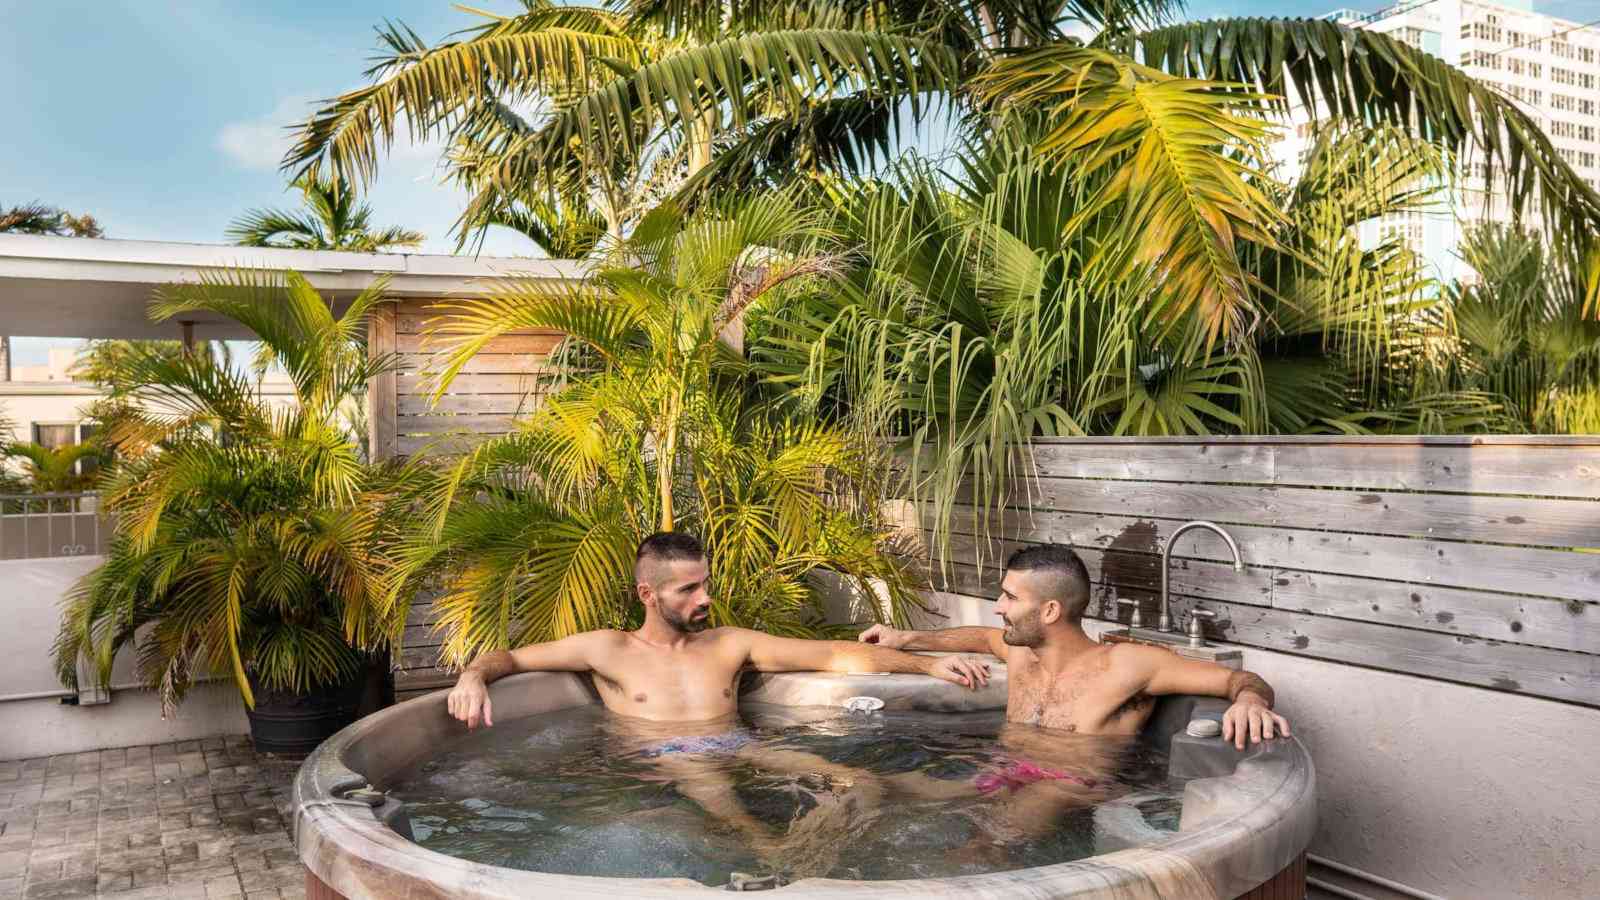 beautiful gay resorts in fort lauderdale, including clothing optional resor...